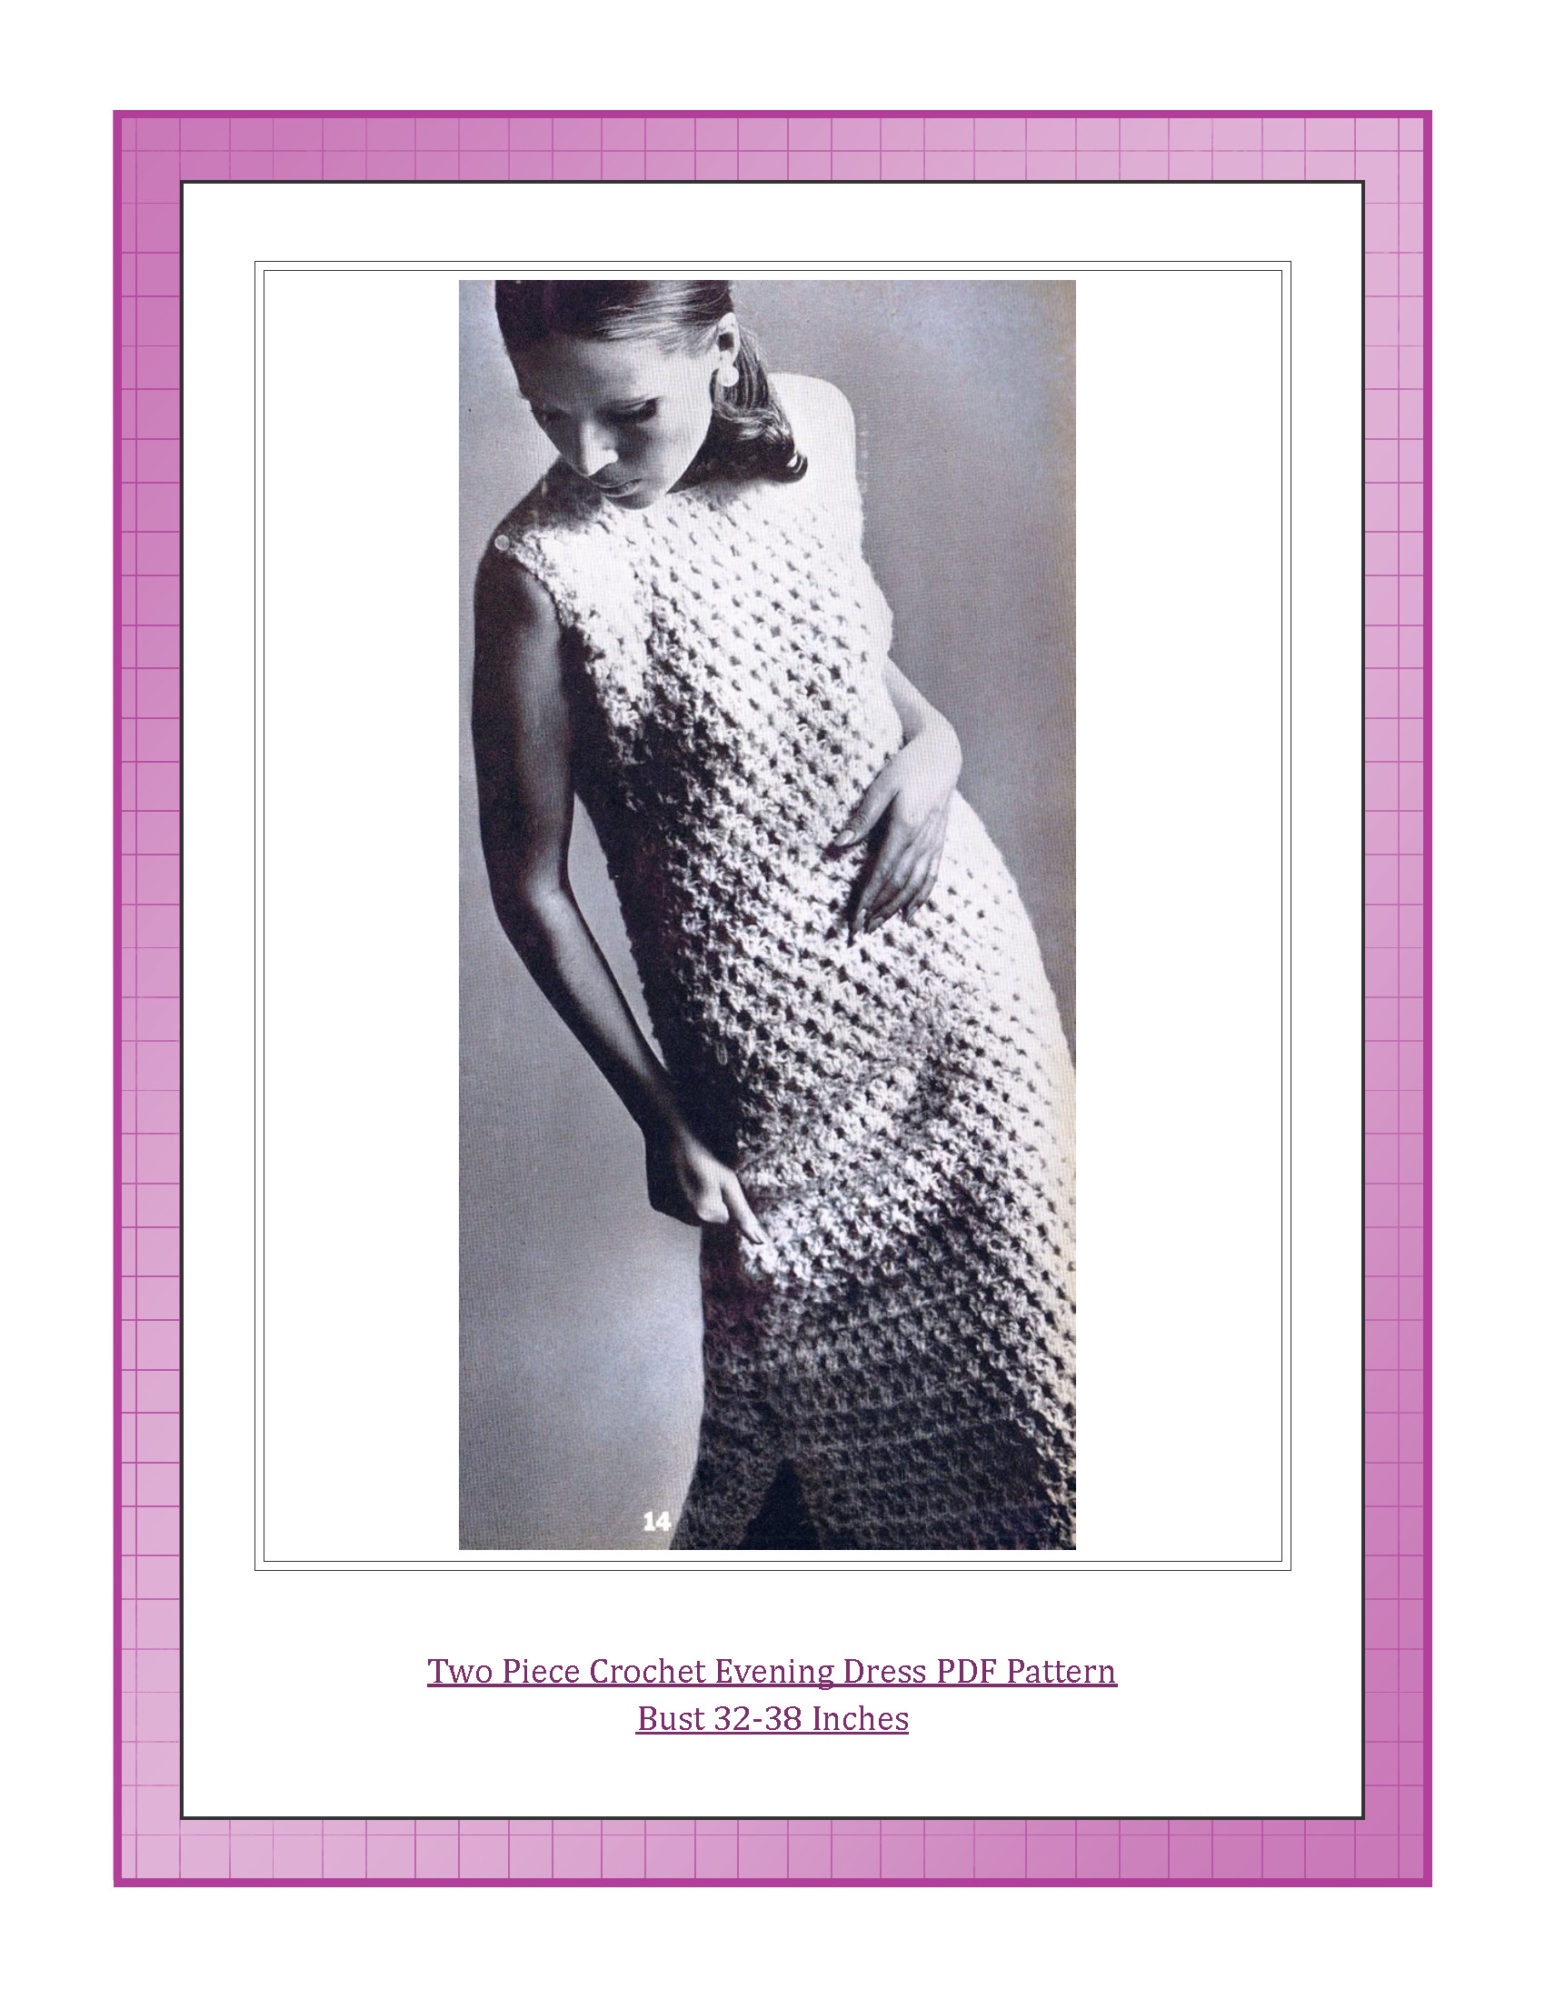 Two Piece Crochet Evening Dress PDF Pattern Bust 32-38 Inches